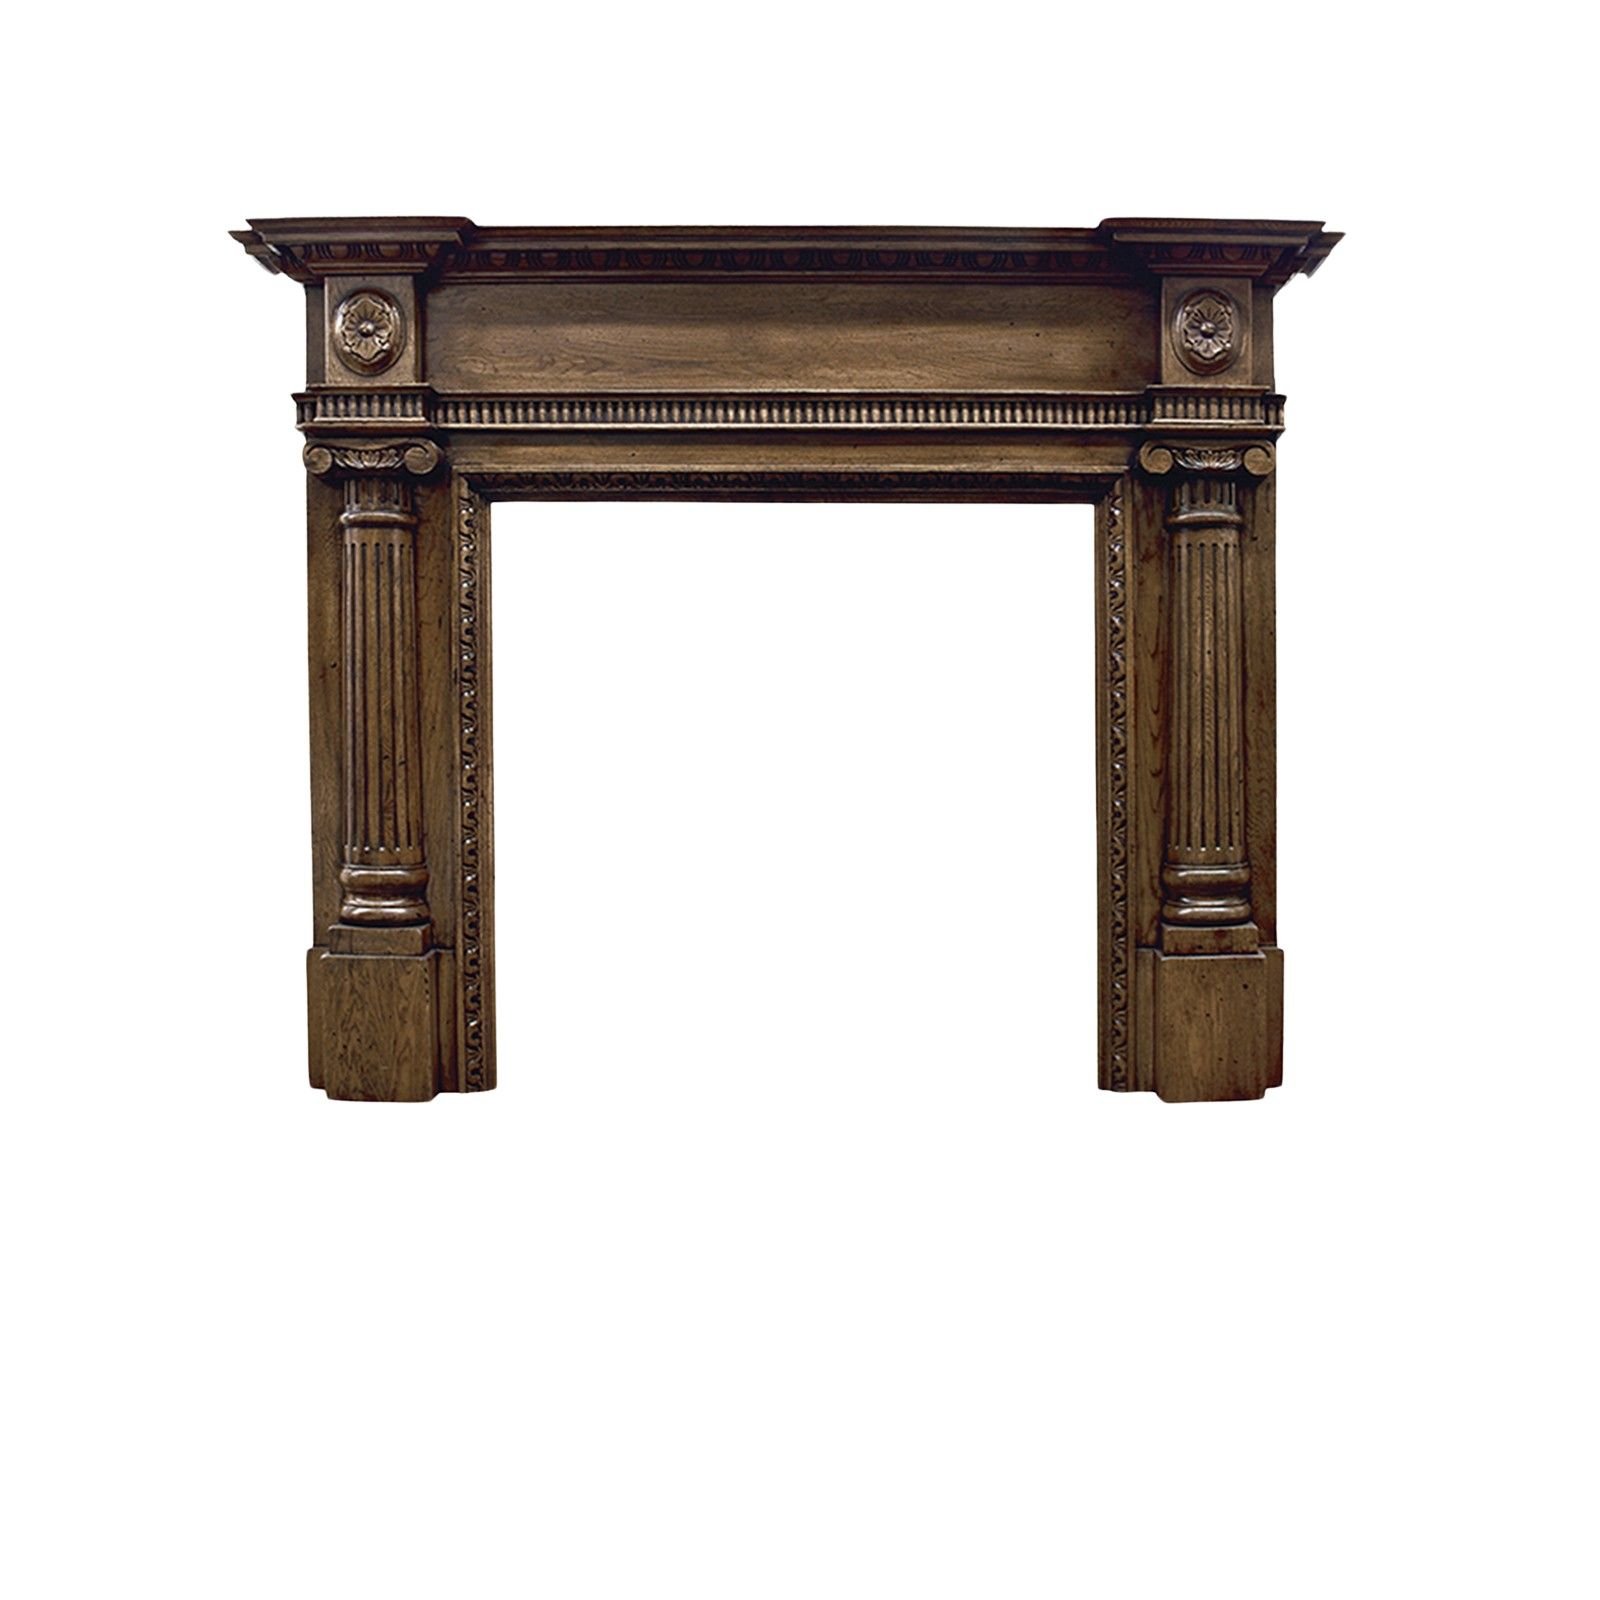 The Ashleigh Wooden Fireplace surround in an unfinished or distressed oak finish